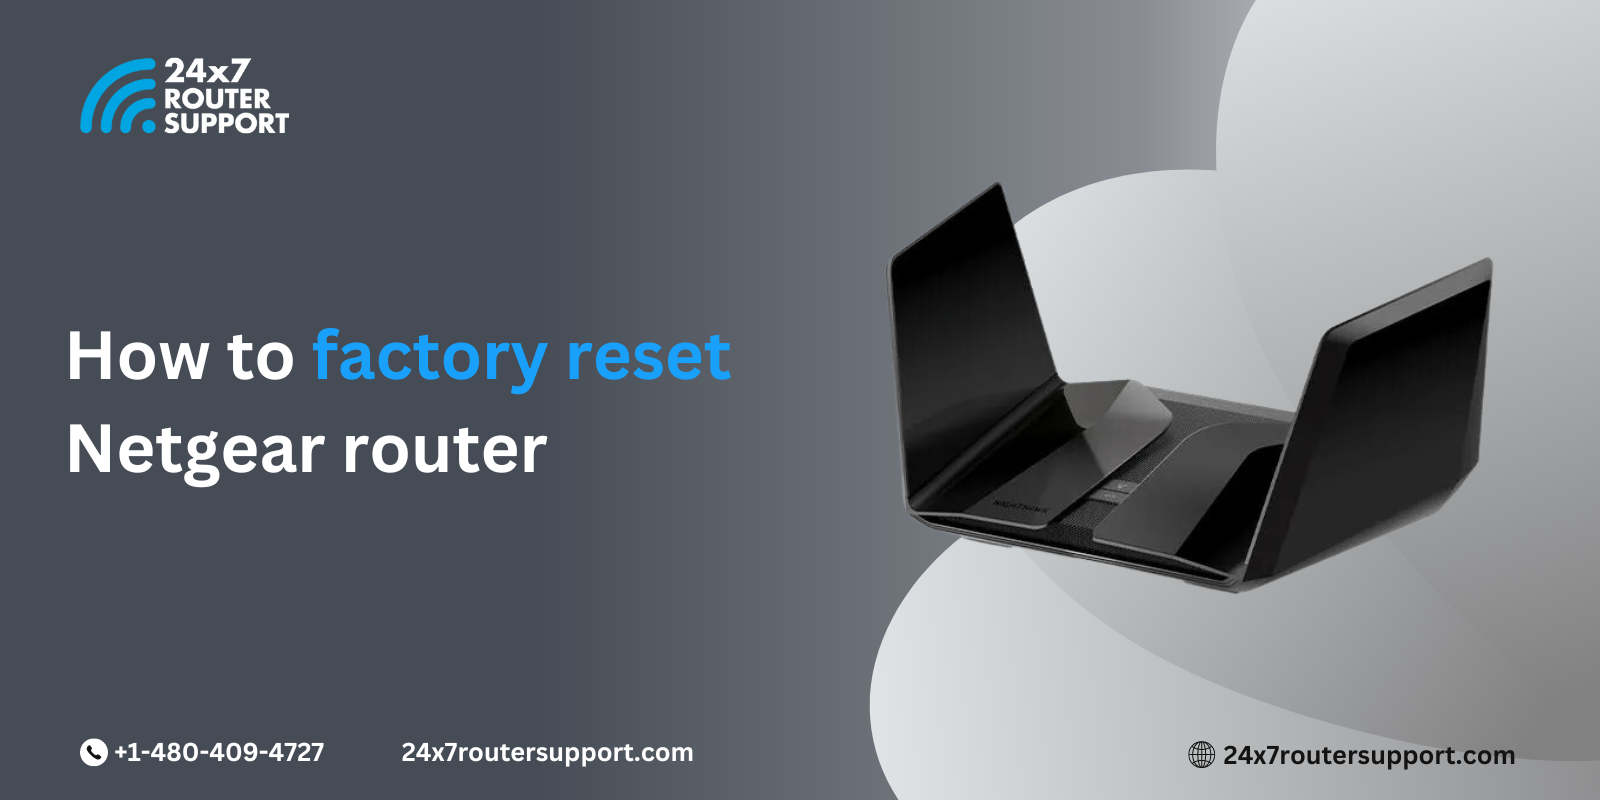 How To Factory Reset Netgear Router